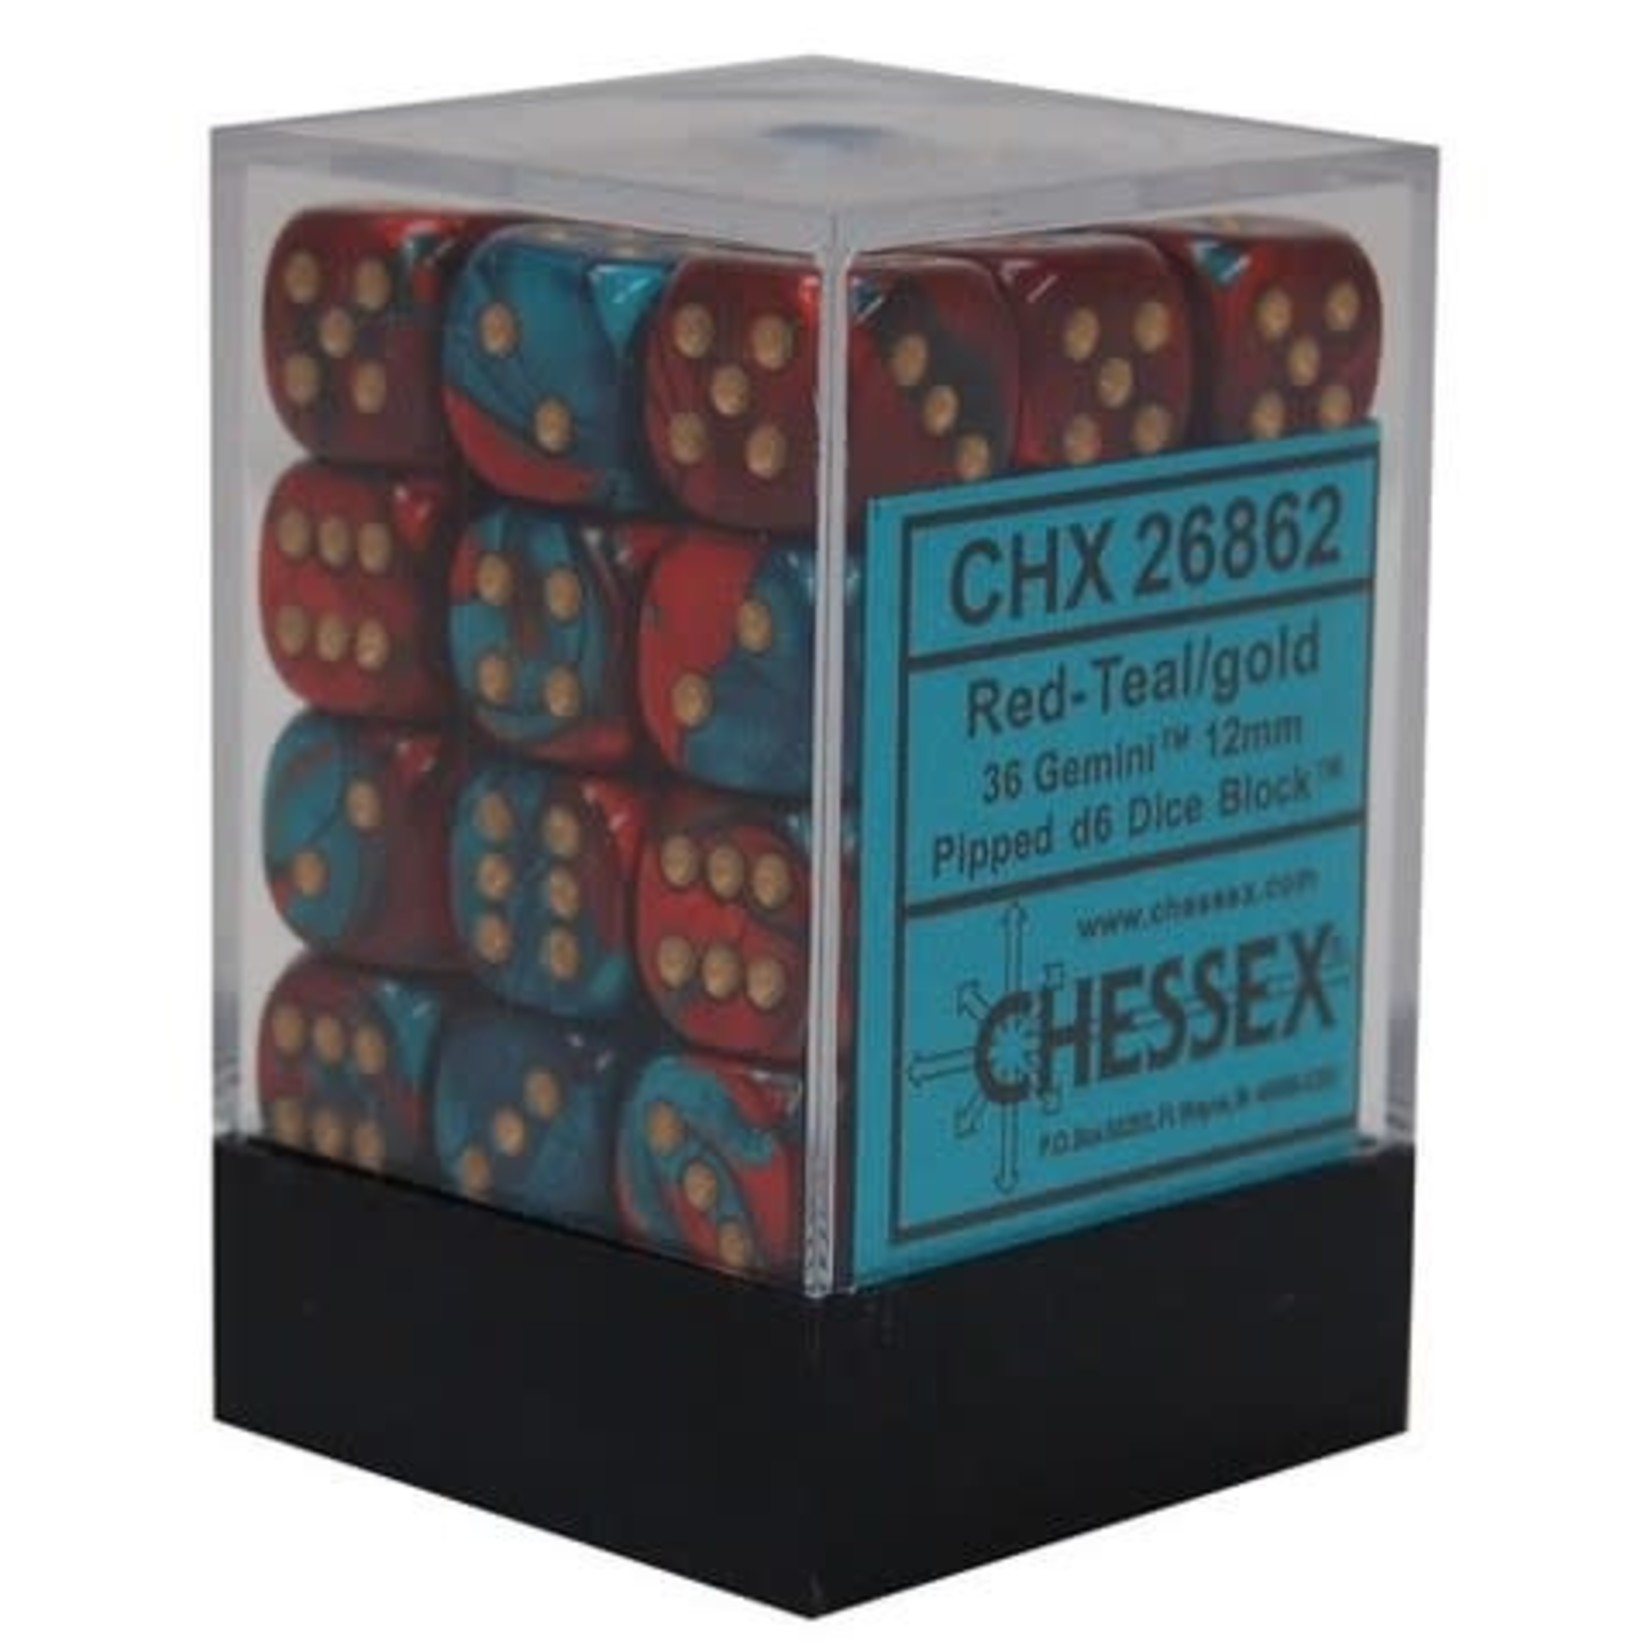 Chessex Gemini Red Teal w/gold 12mm d6 dice (36)